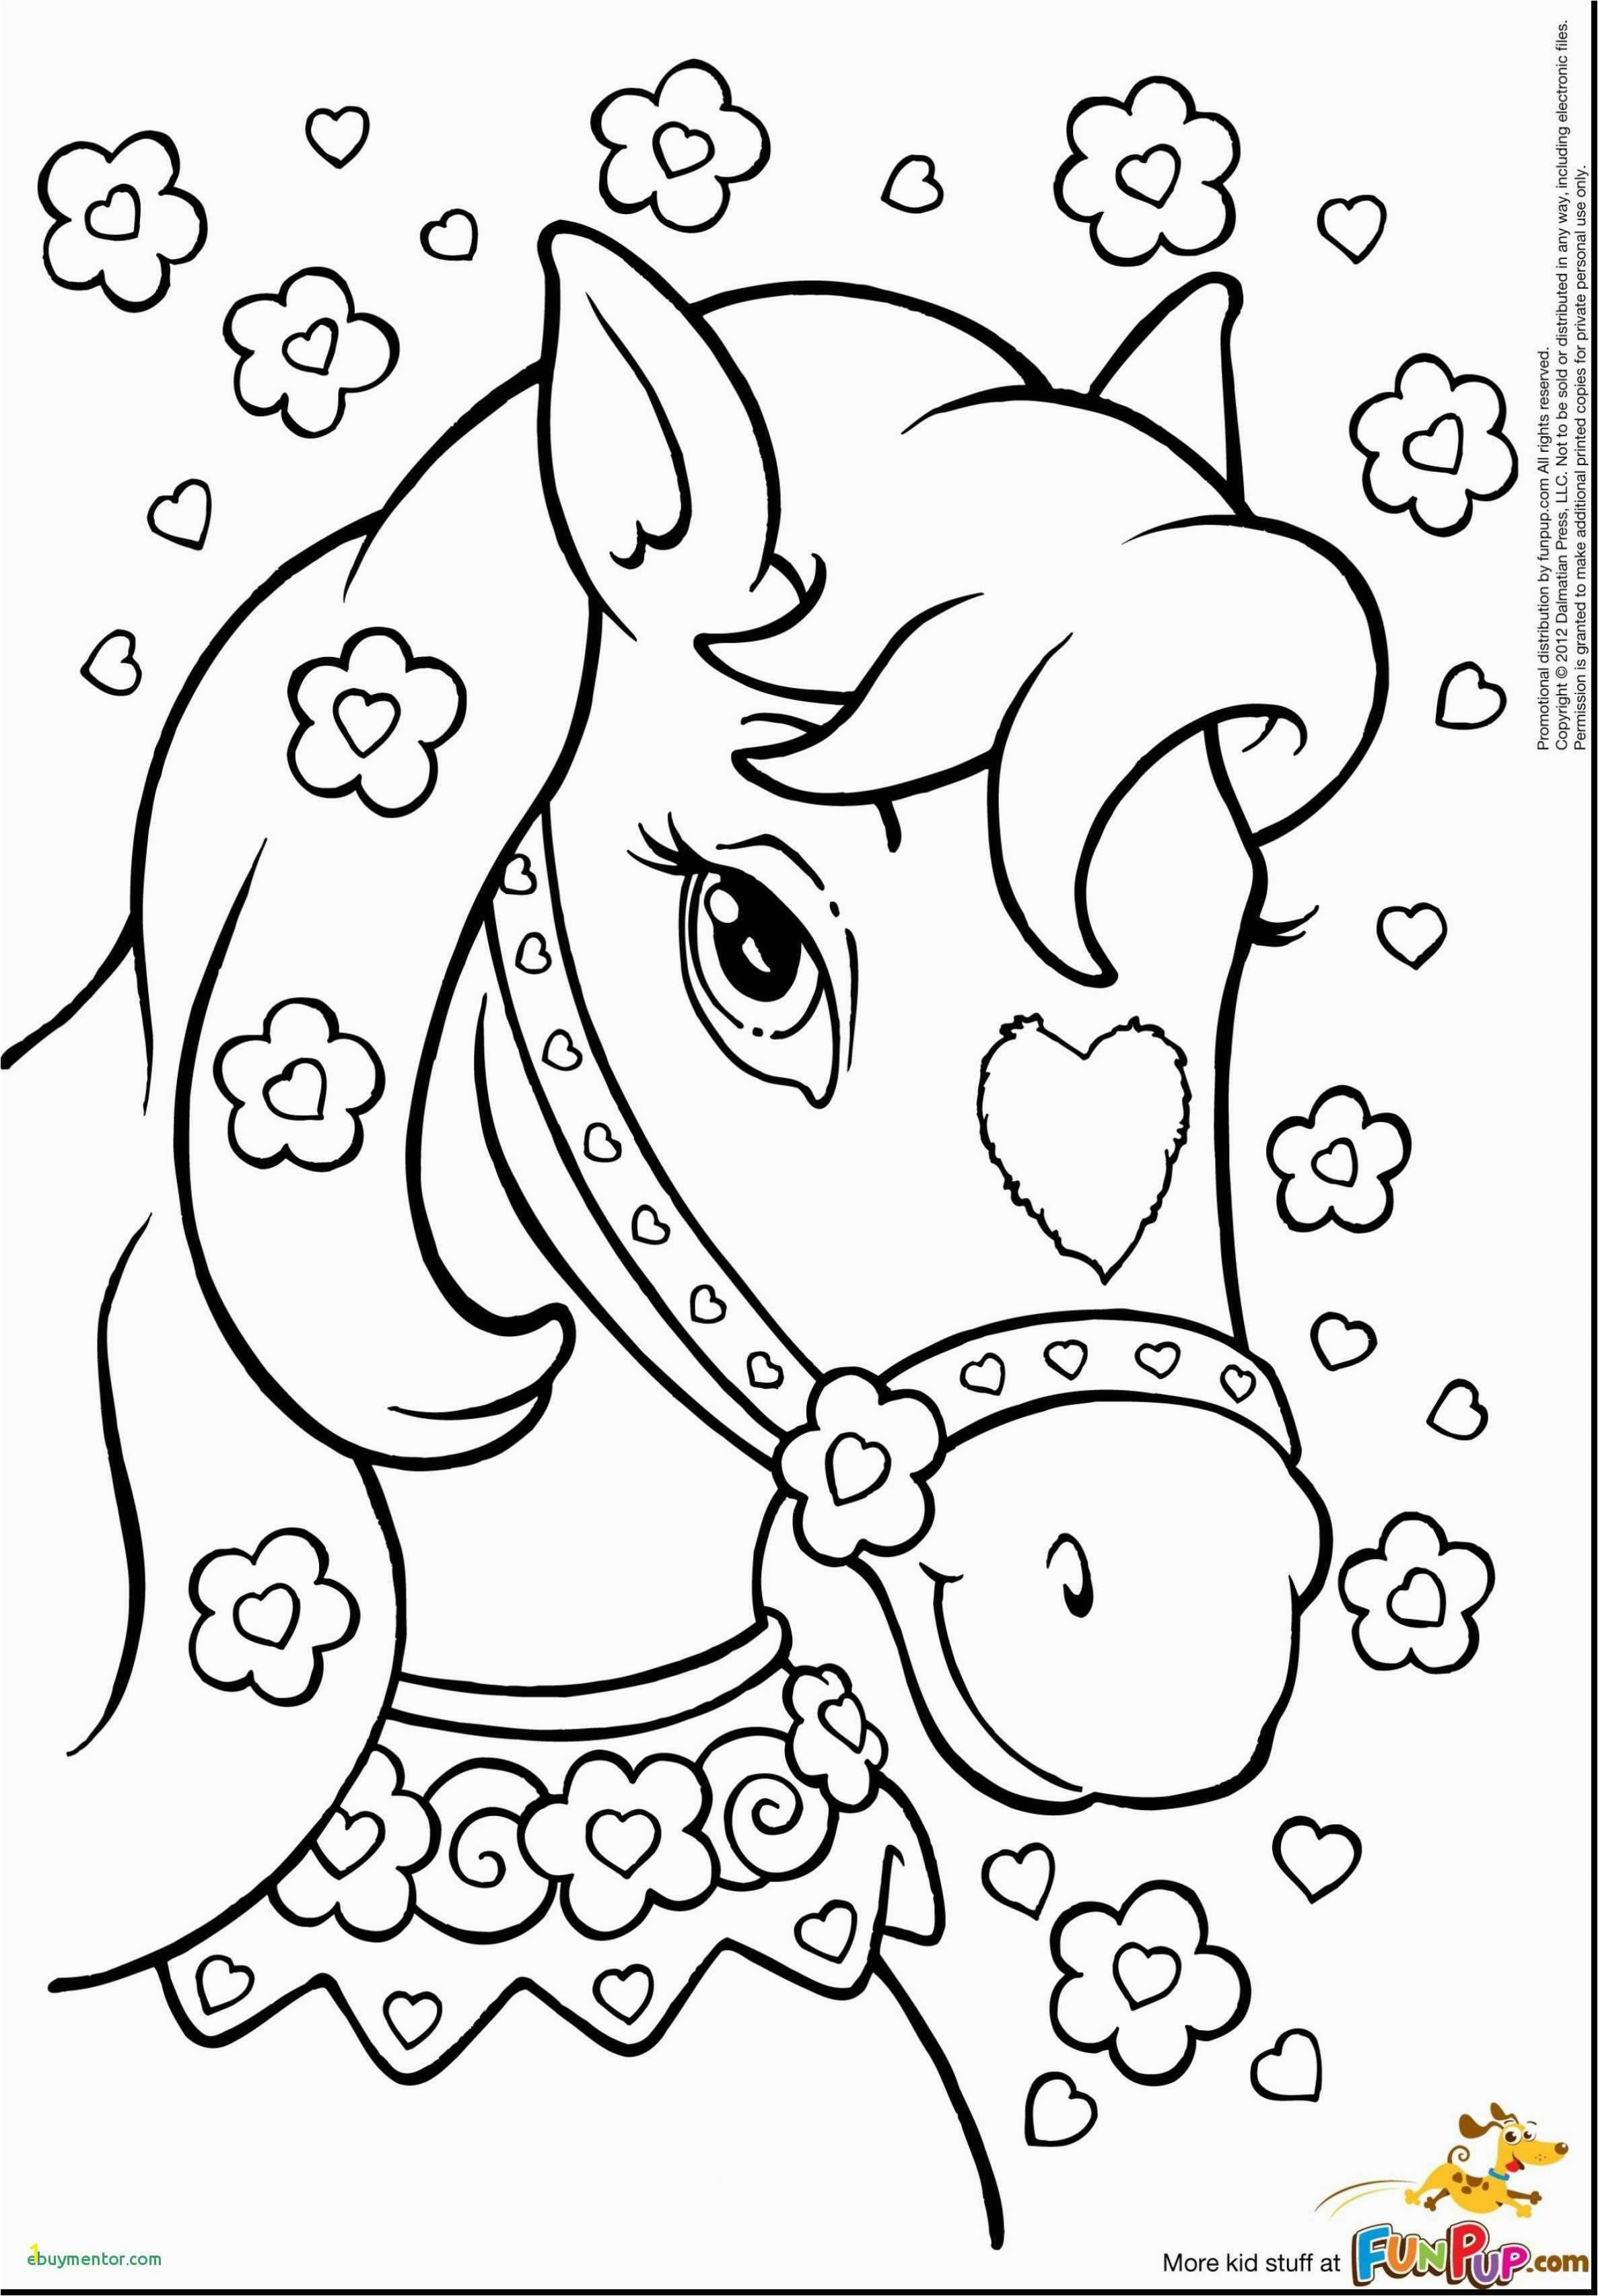 Free Valentine Coloring Sheets Elegant Free Coloring Pages Disney All In e Place Much Faster Than